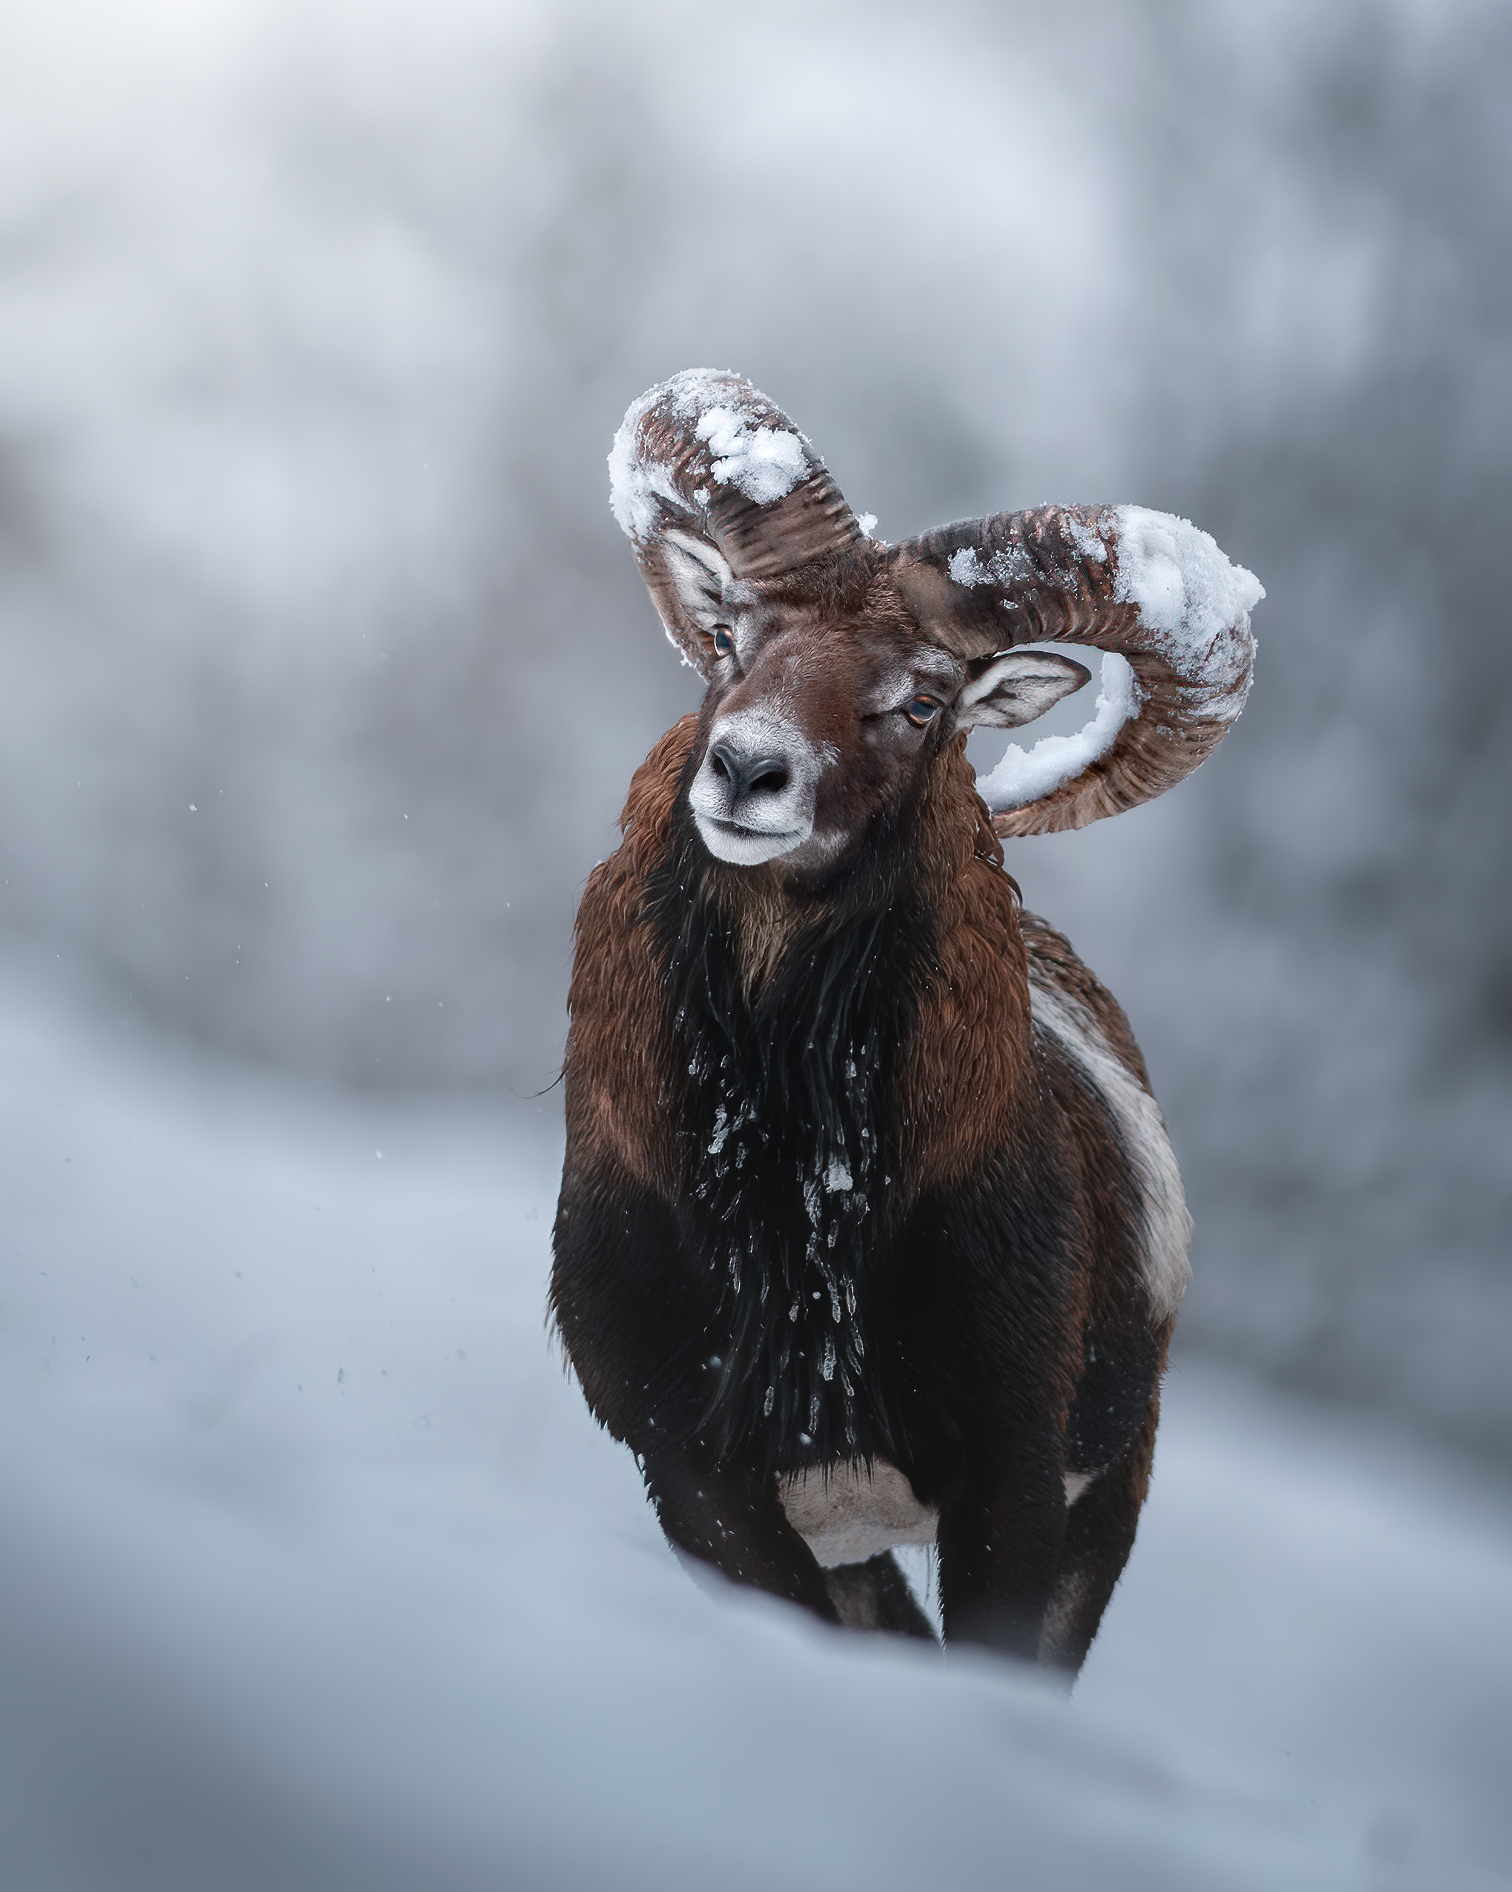 Mouflon and snow, is there better?...